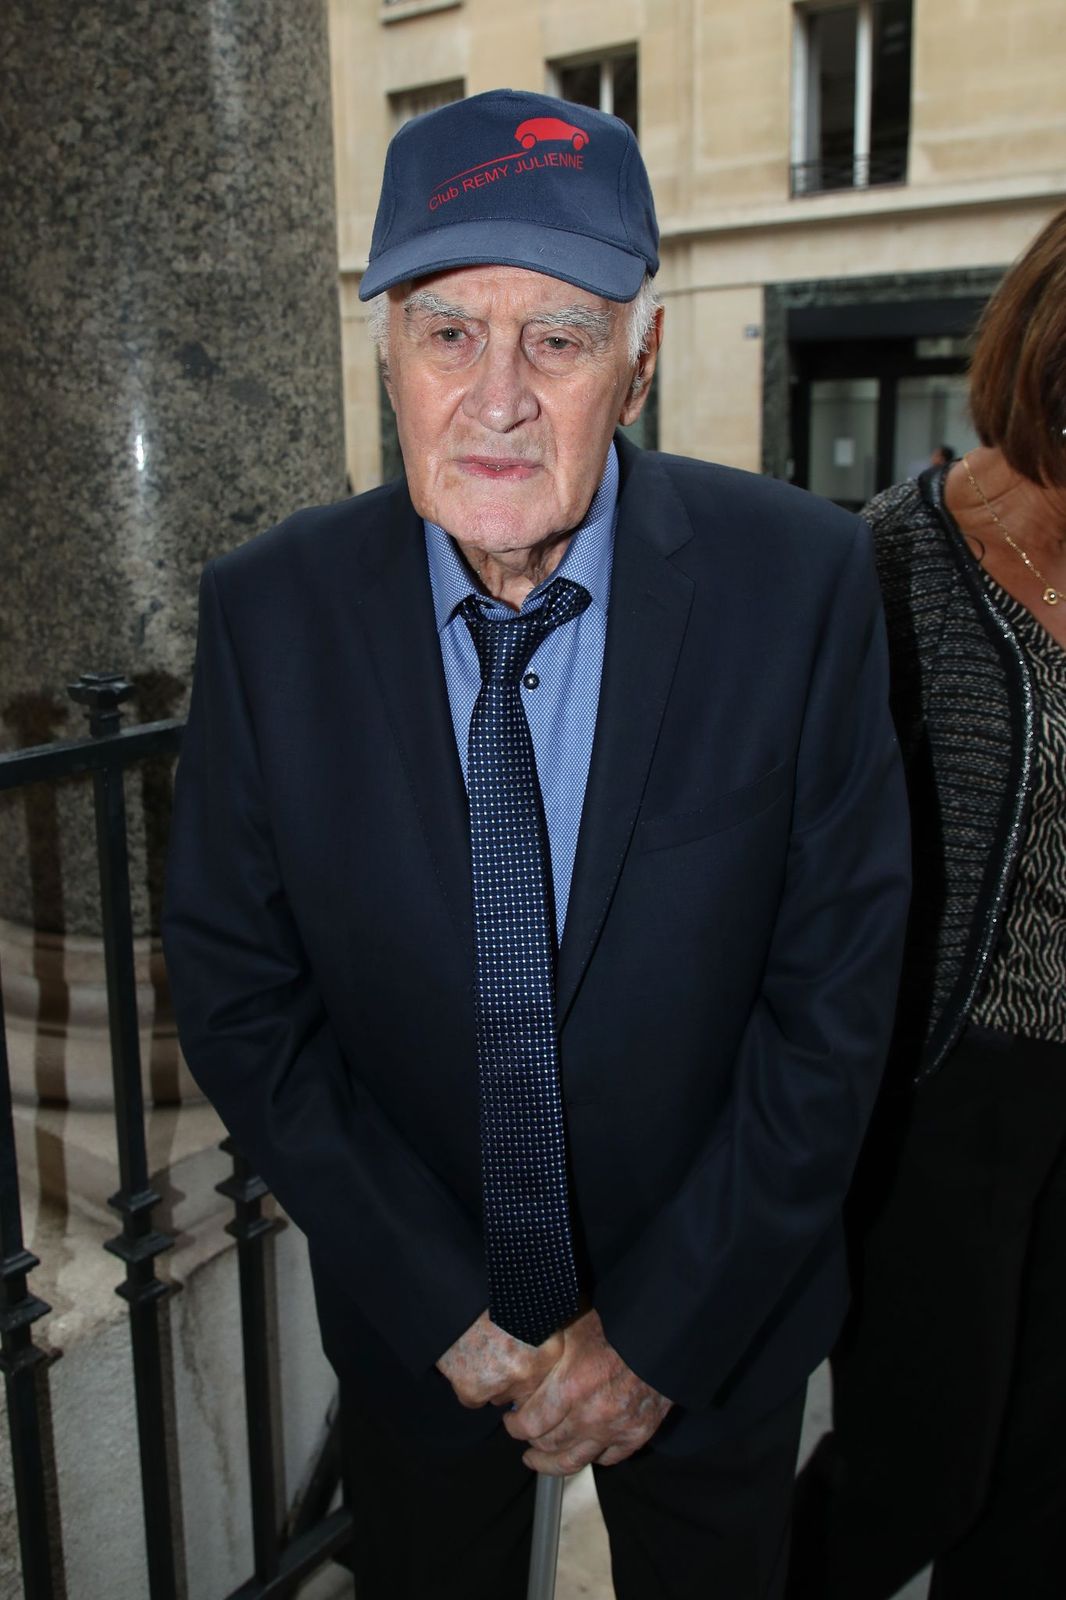 Rémy Julienne at Charles Gerard's Funeral at Saint-Jean-Baptiste Armenian Apostolic Cathedral in Paris, France on September 26, 2019 | Photo: Bertrand Rindoff Petroff/Getty Images